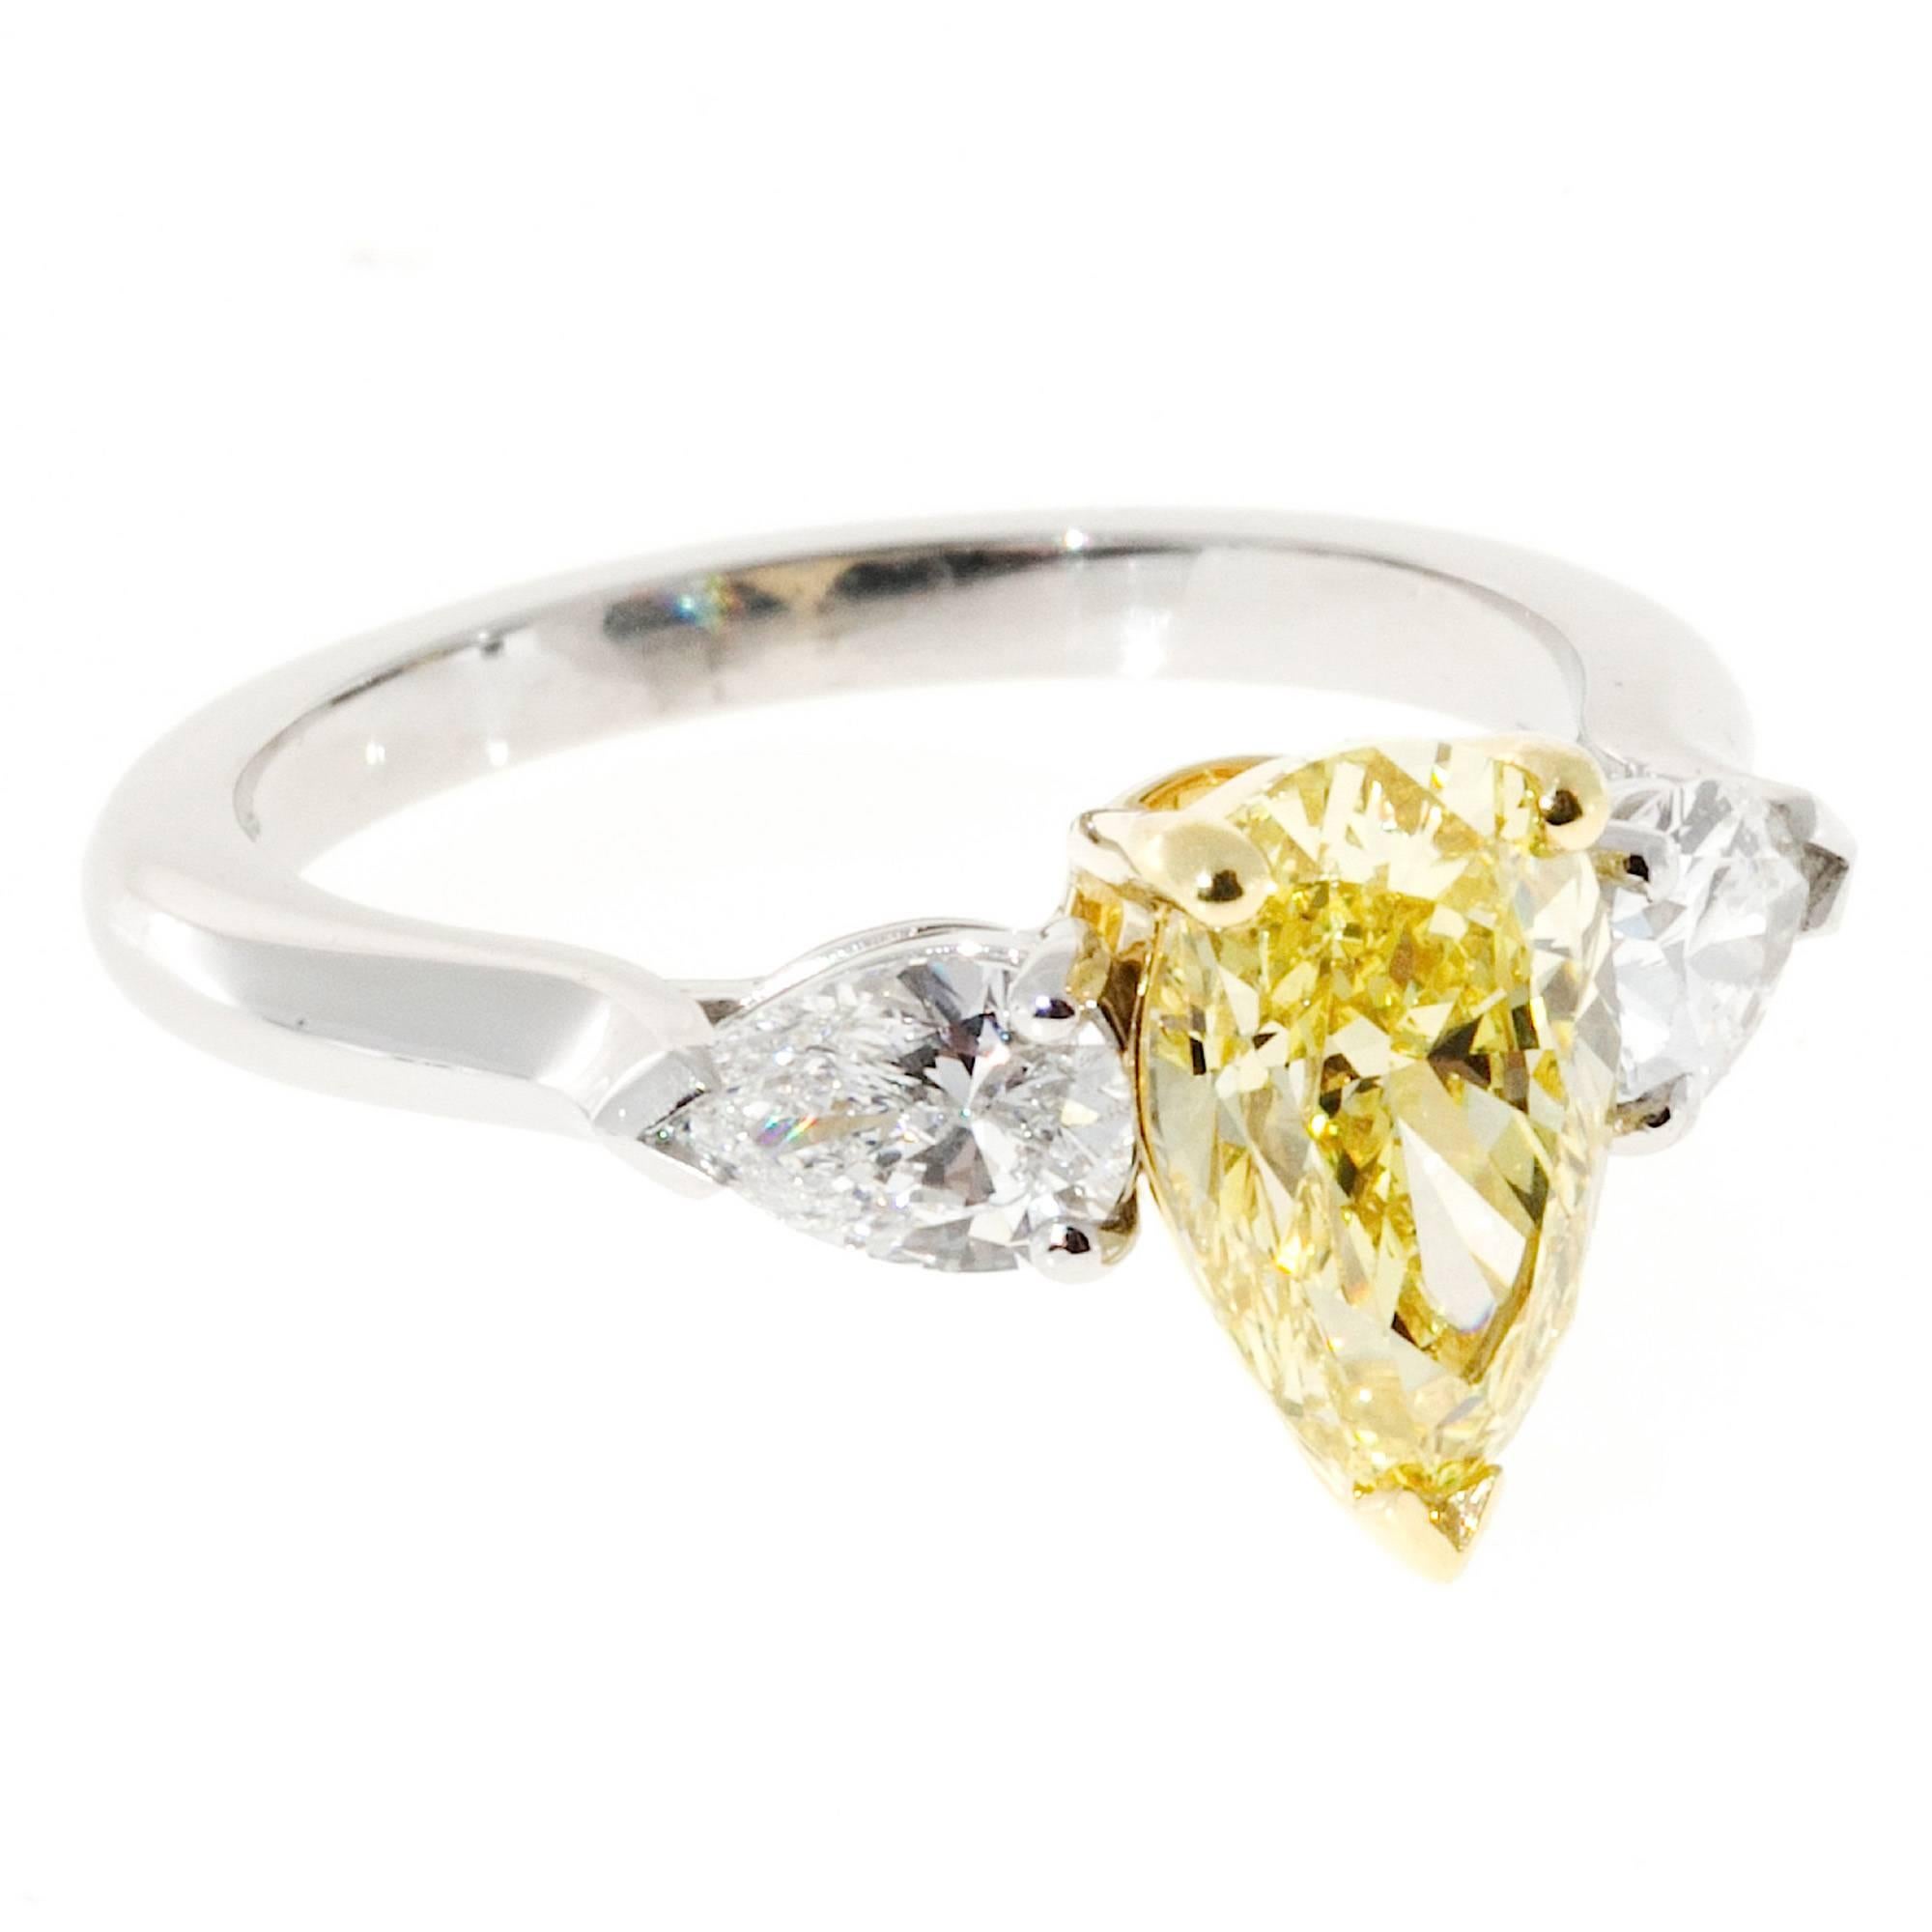 Fancy intense yellow pear shaped diamond flanked by two white pear shaped diamonds. The center diamond is Ideal cut. 18k yellow gold center setting with a platinum shank. The ring was designed by Peter Suchy Workshop to show off the beauty of the